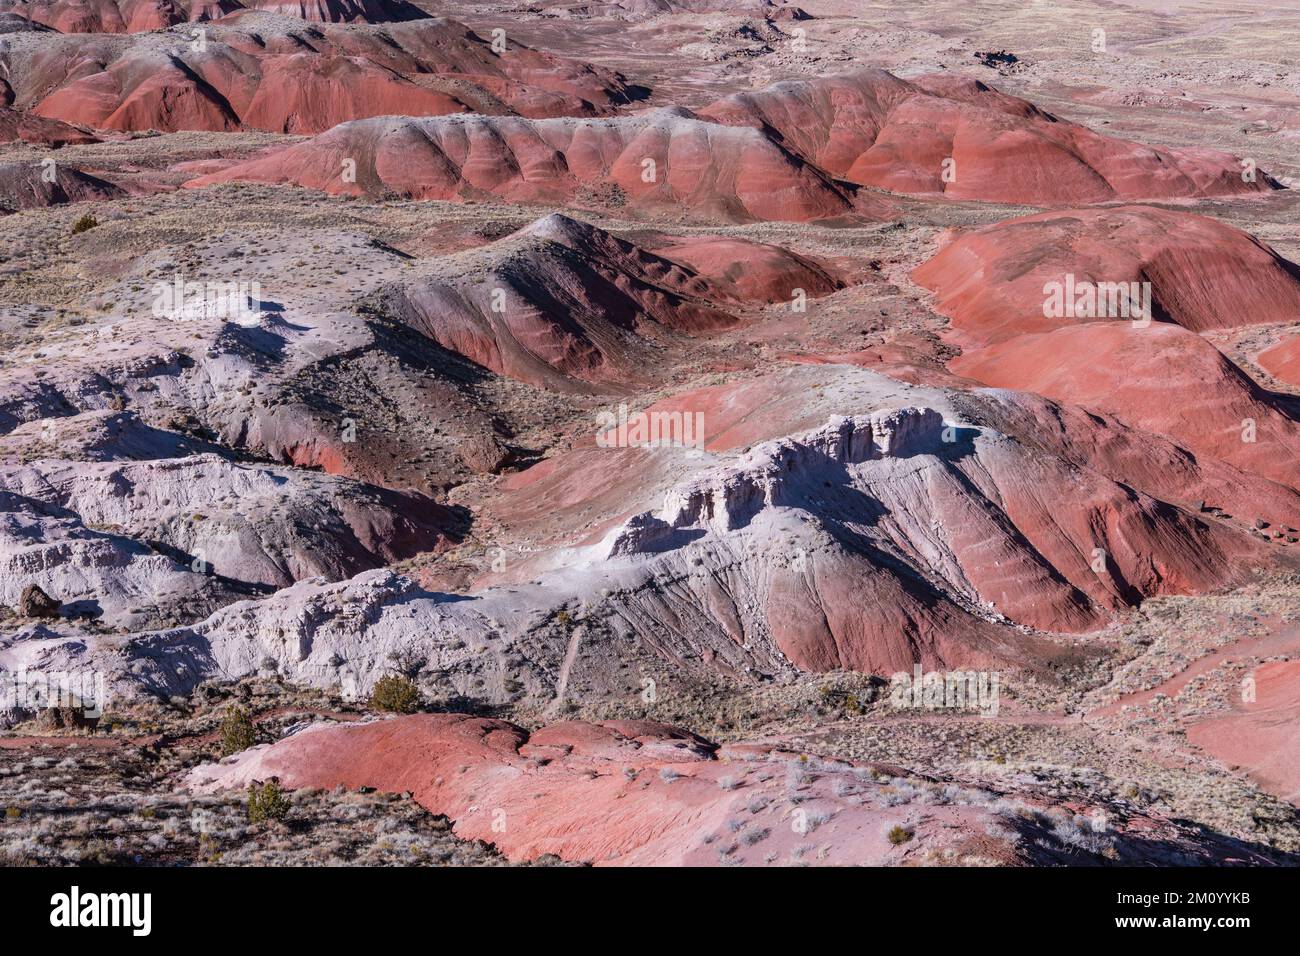 High angle view of vibrant, colorful landscape of desert badlands in Painted Desert, Petrified Forest National Park, Arizona Stock Photo